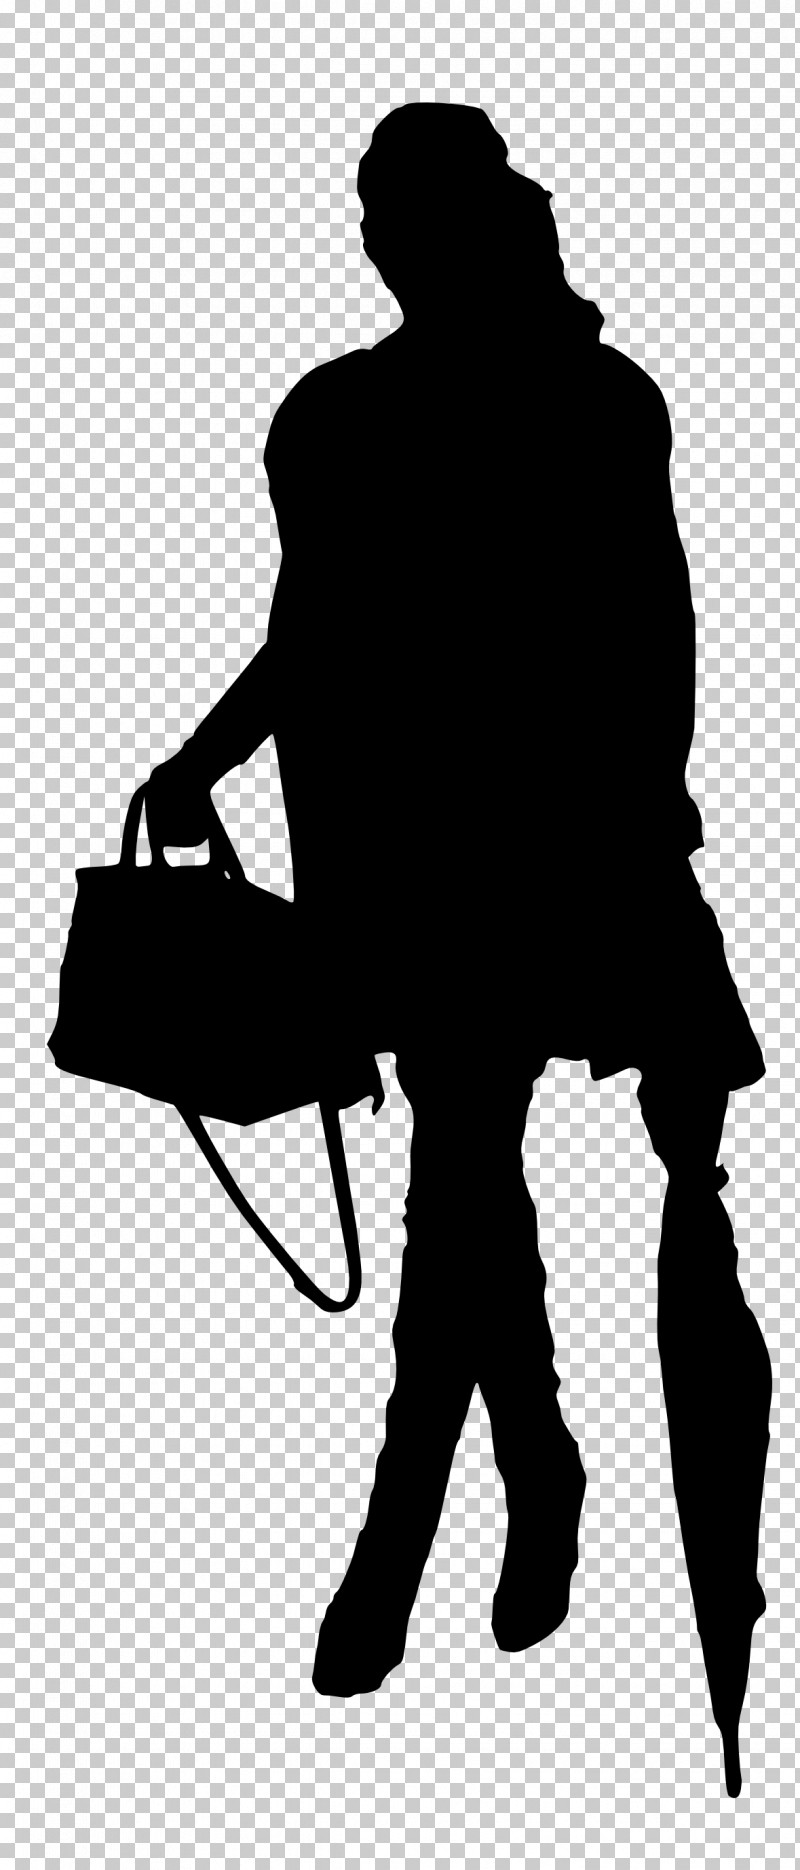 Silhouette Black-and-white Sitting PNG, Clipart, Blackandwhite, Silhouette, Sitting Free PNG Download